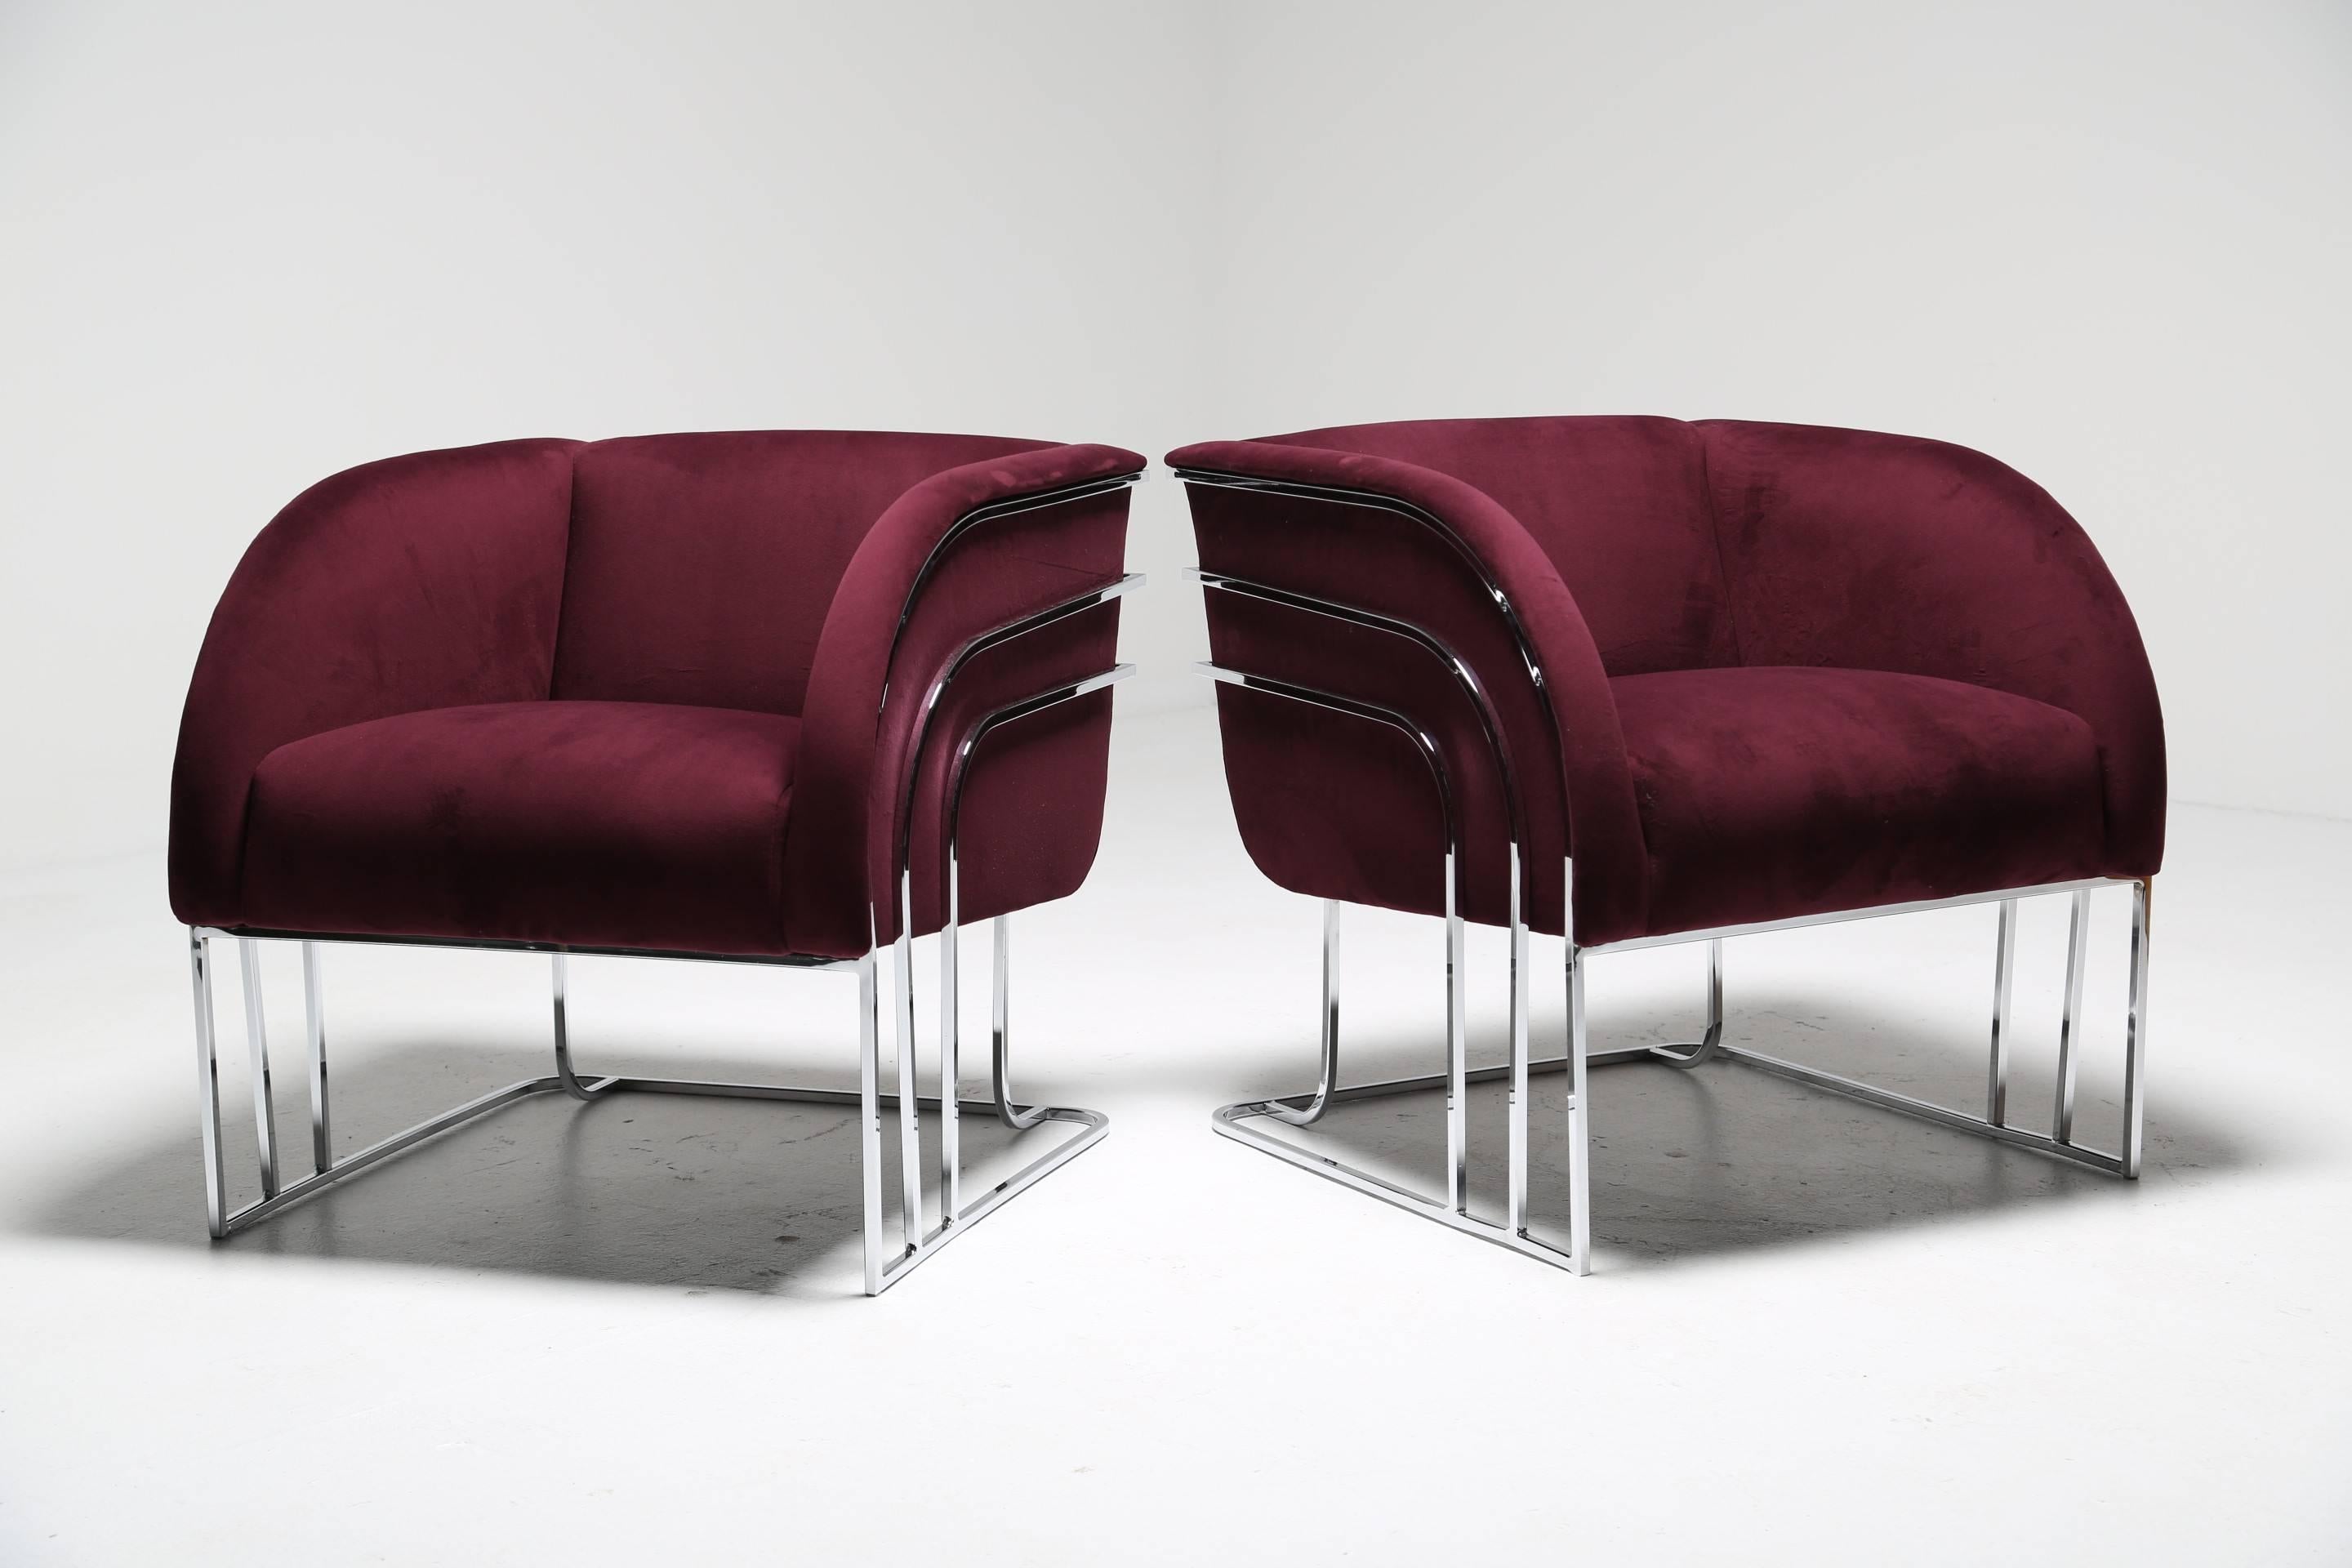 Plated Mid-century Chrome Lounge chairs, Milo Baughman Style